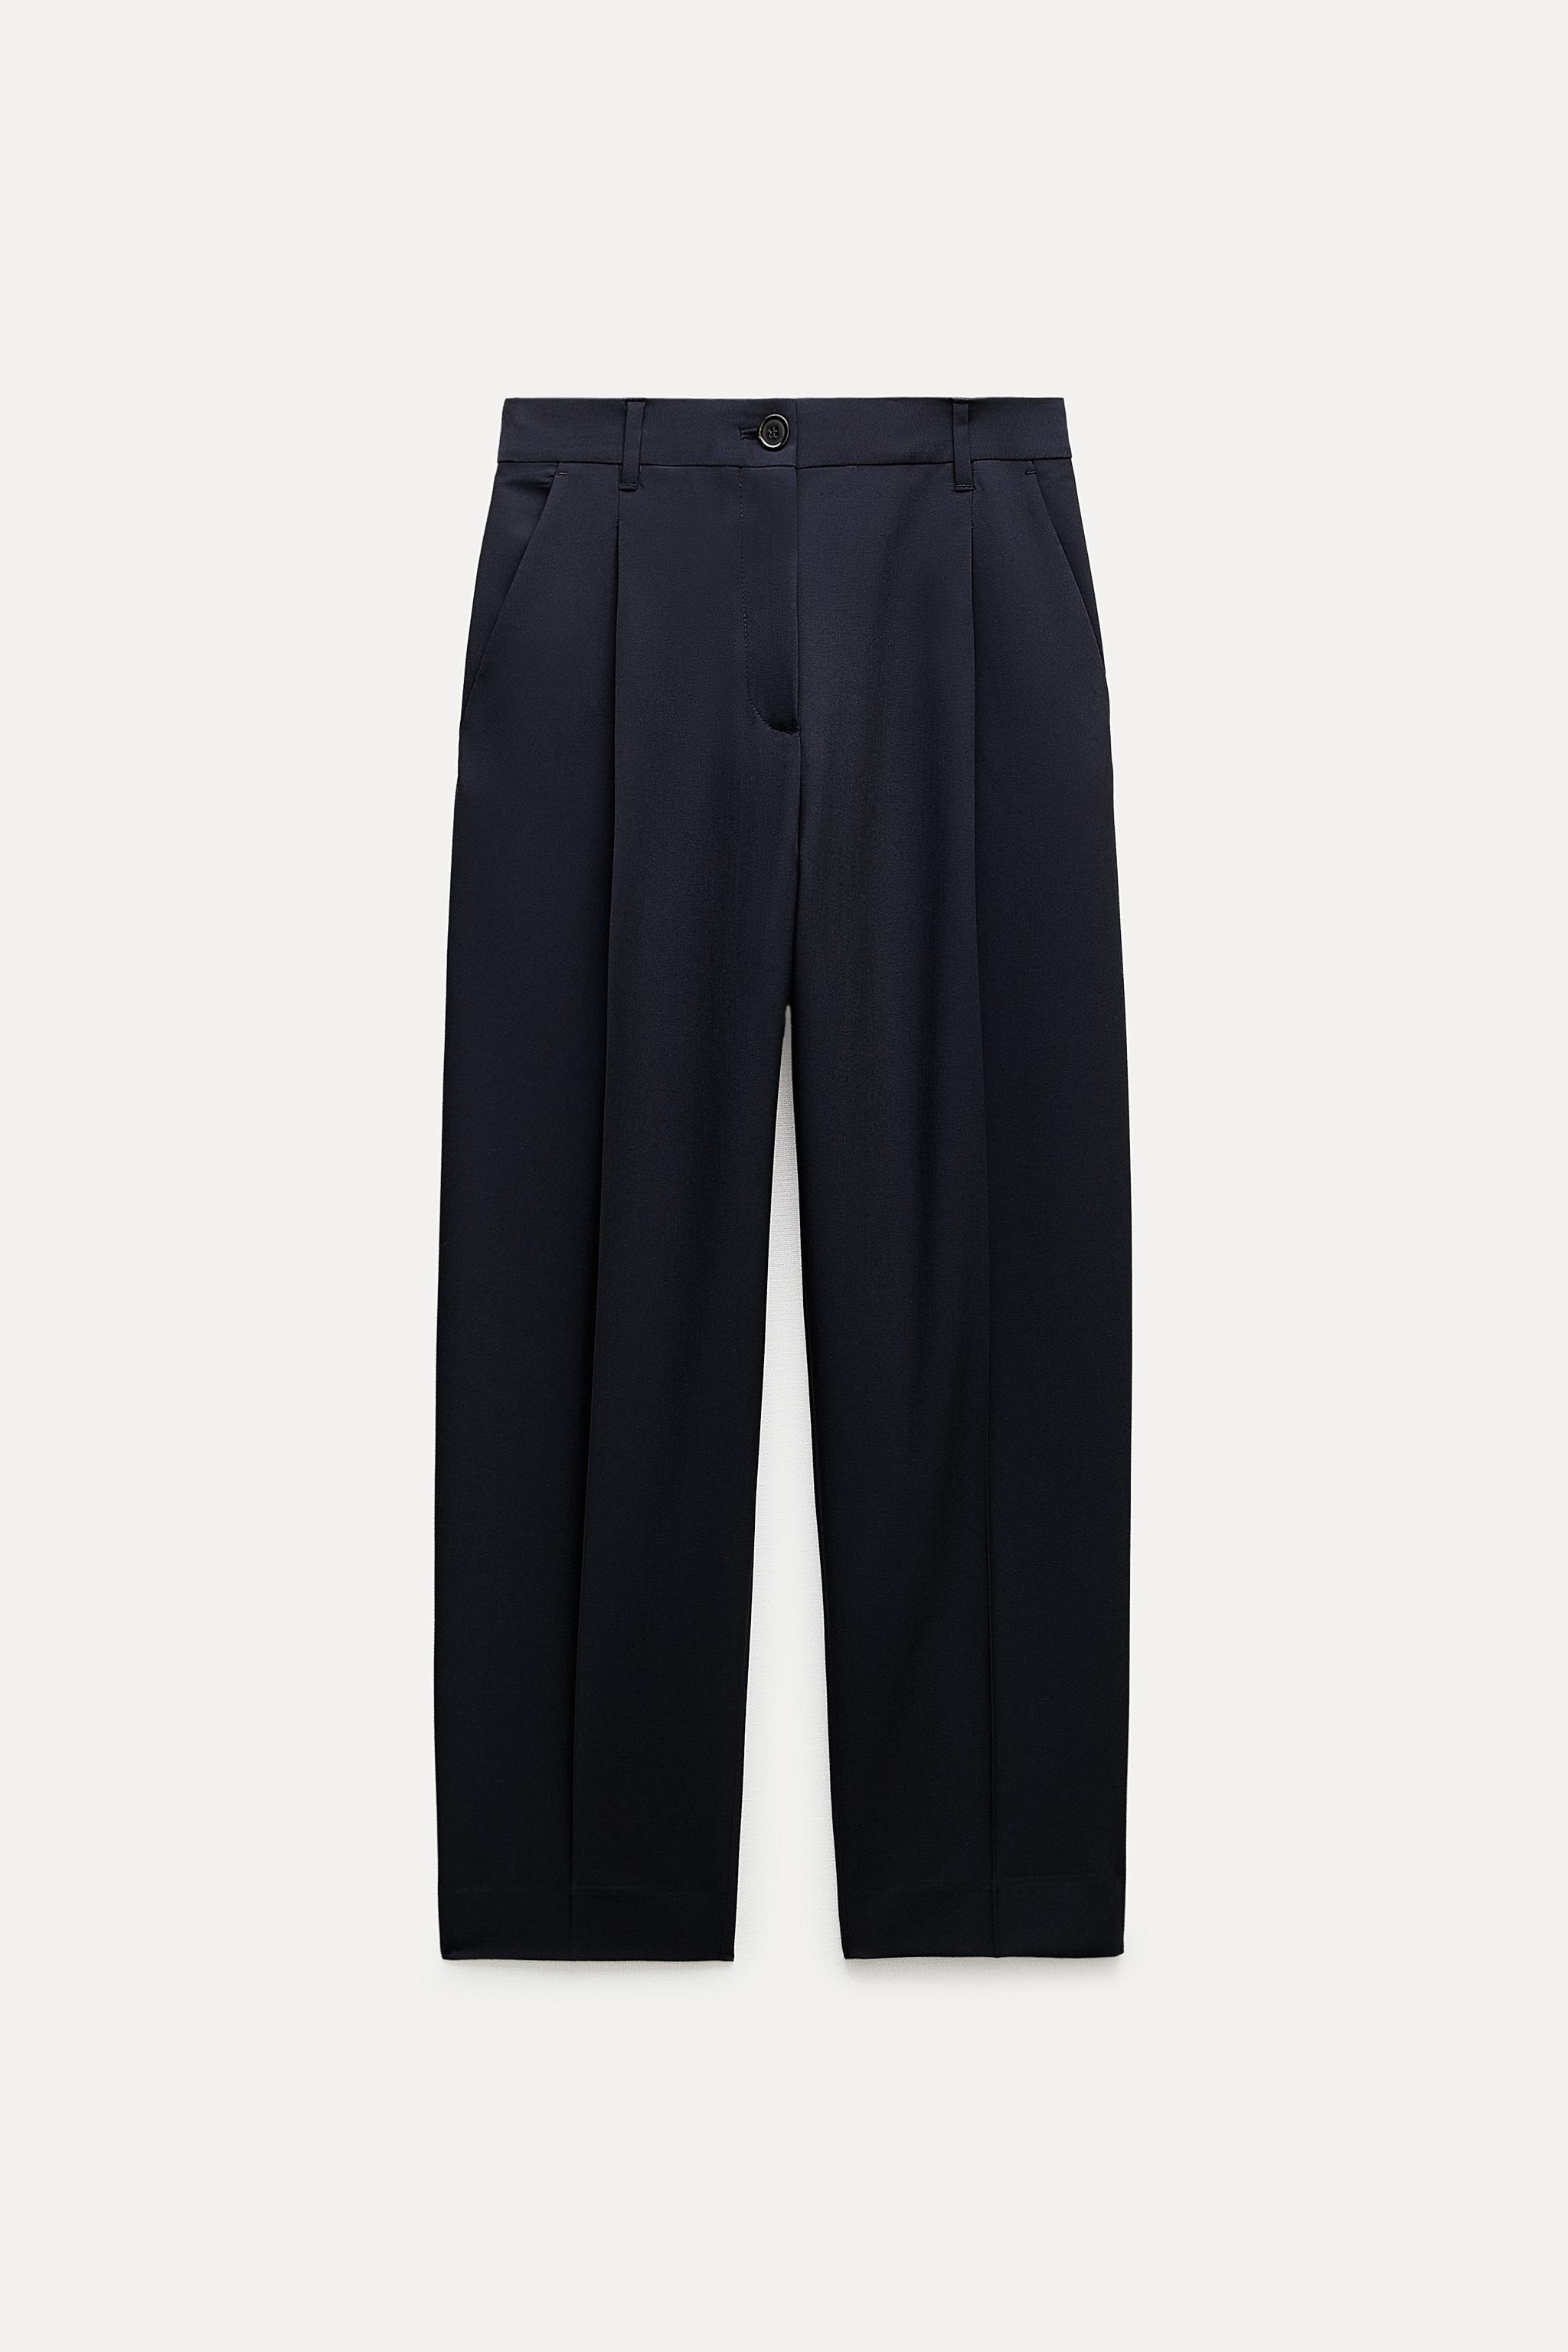 PLEATED PANTS ZW COLLECTION - Navy blue